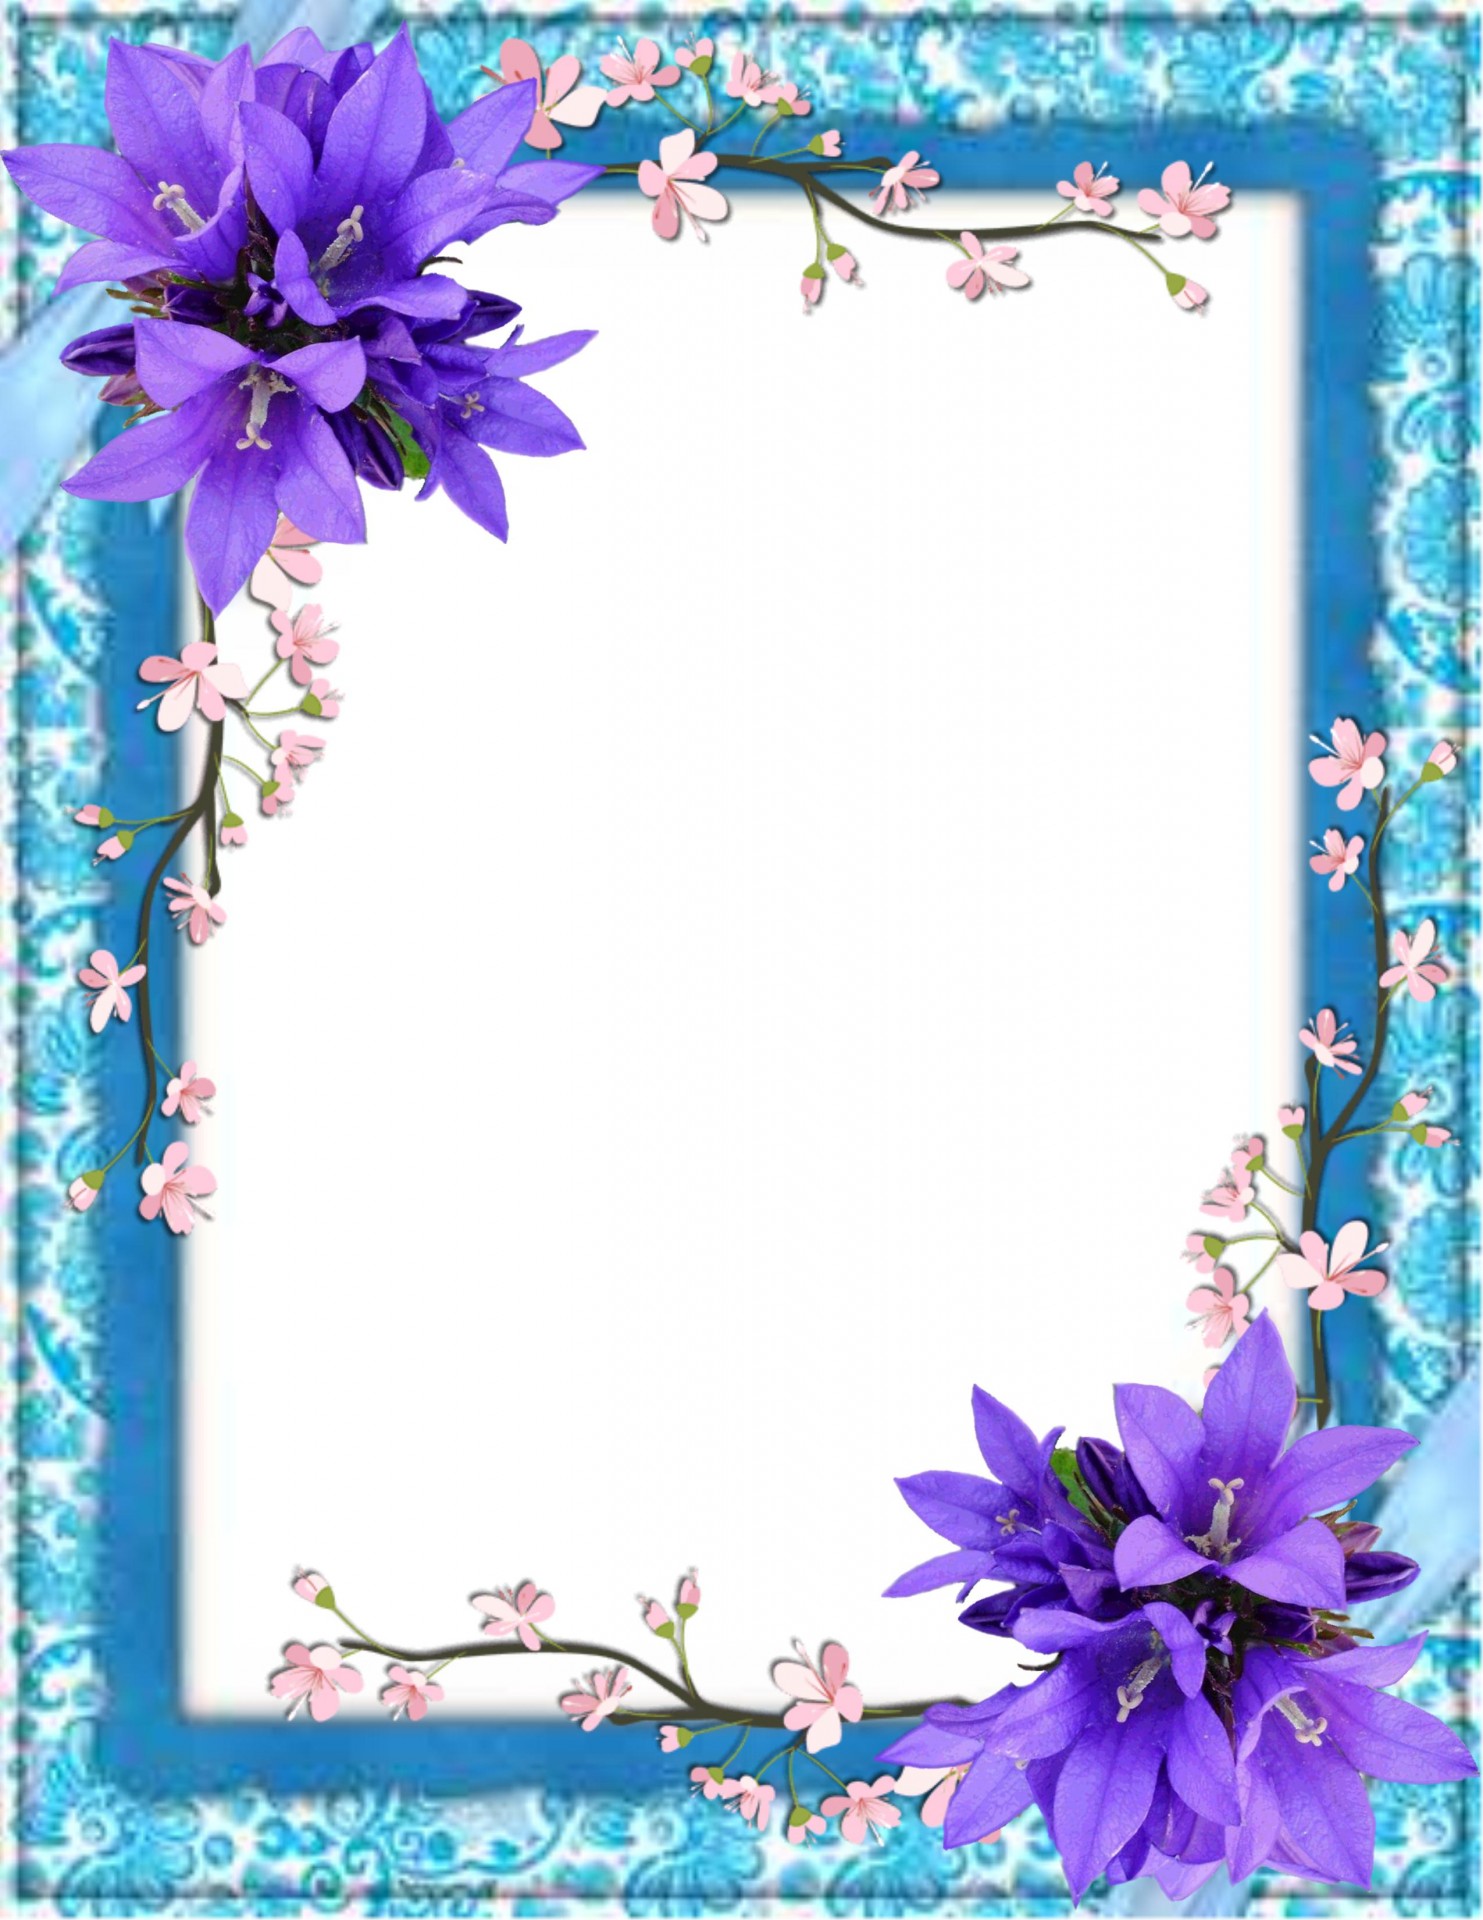 picture frame frame photo frame free photo